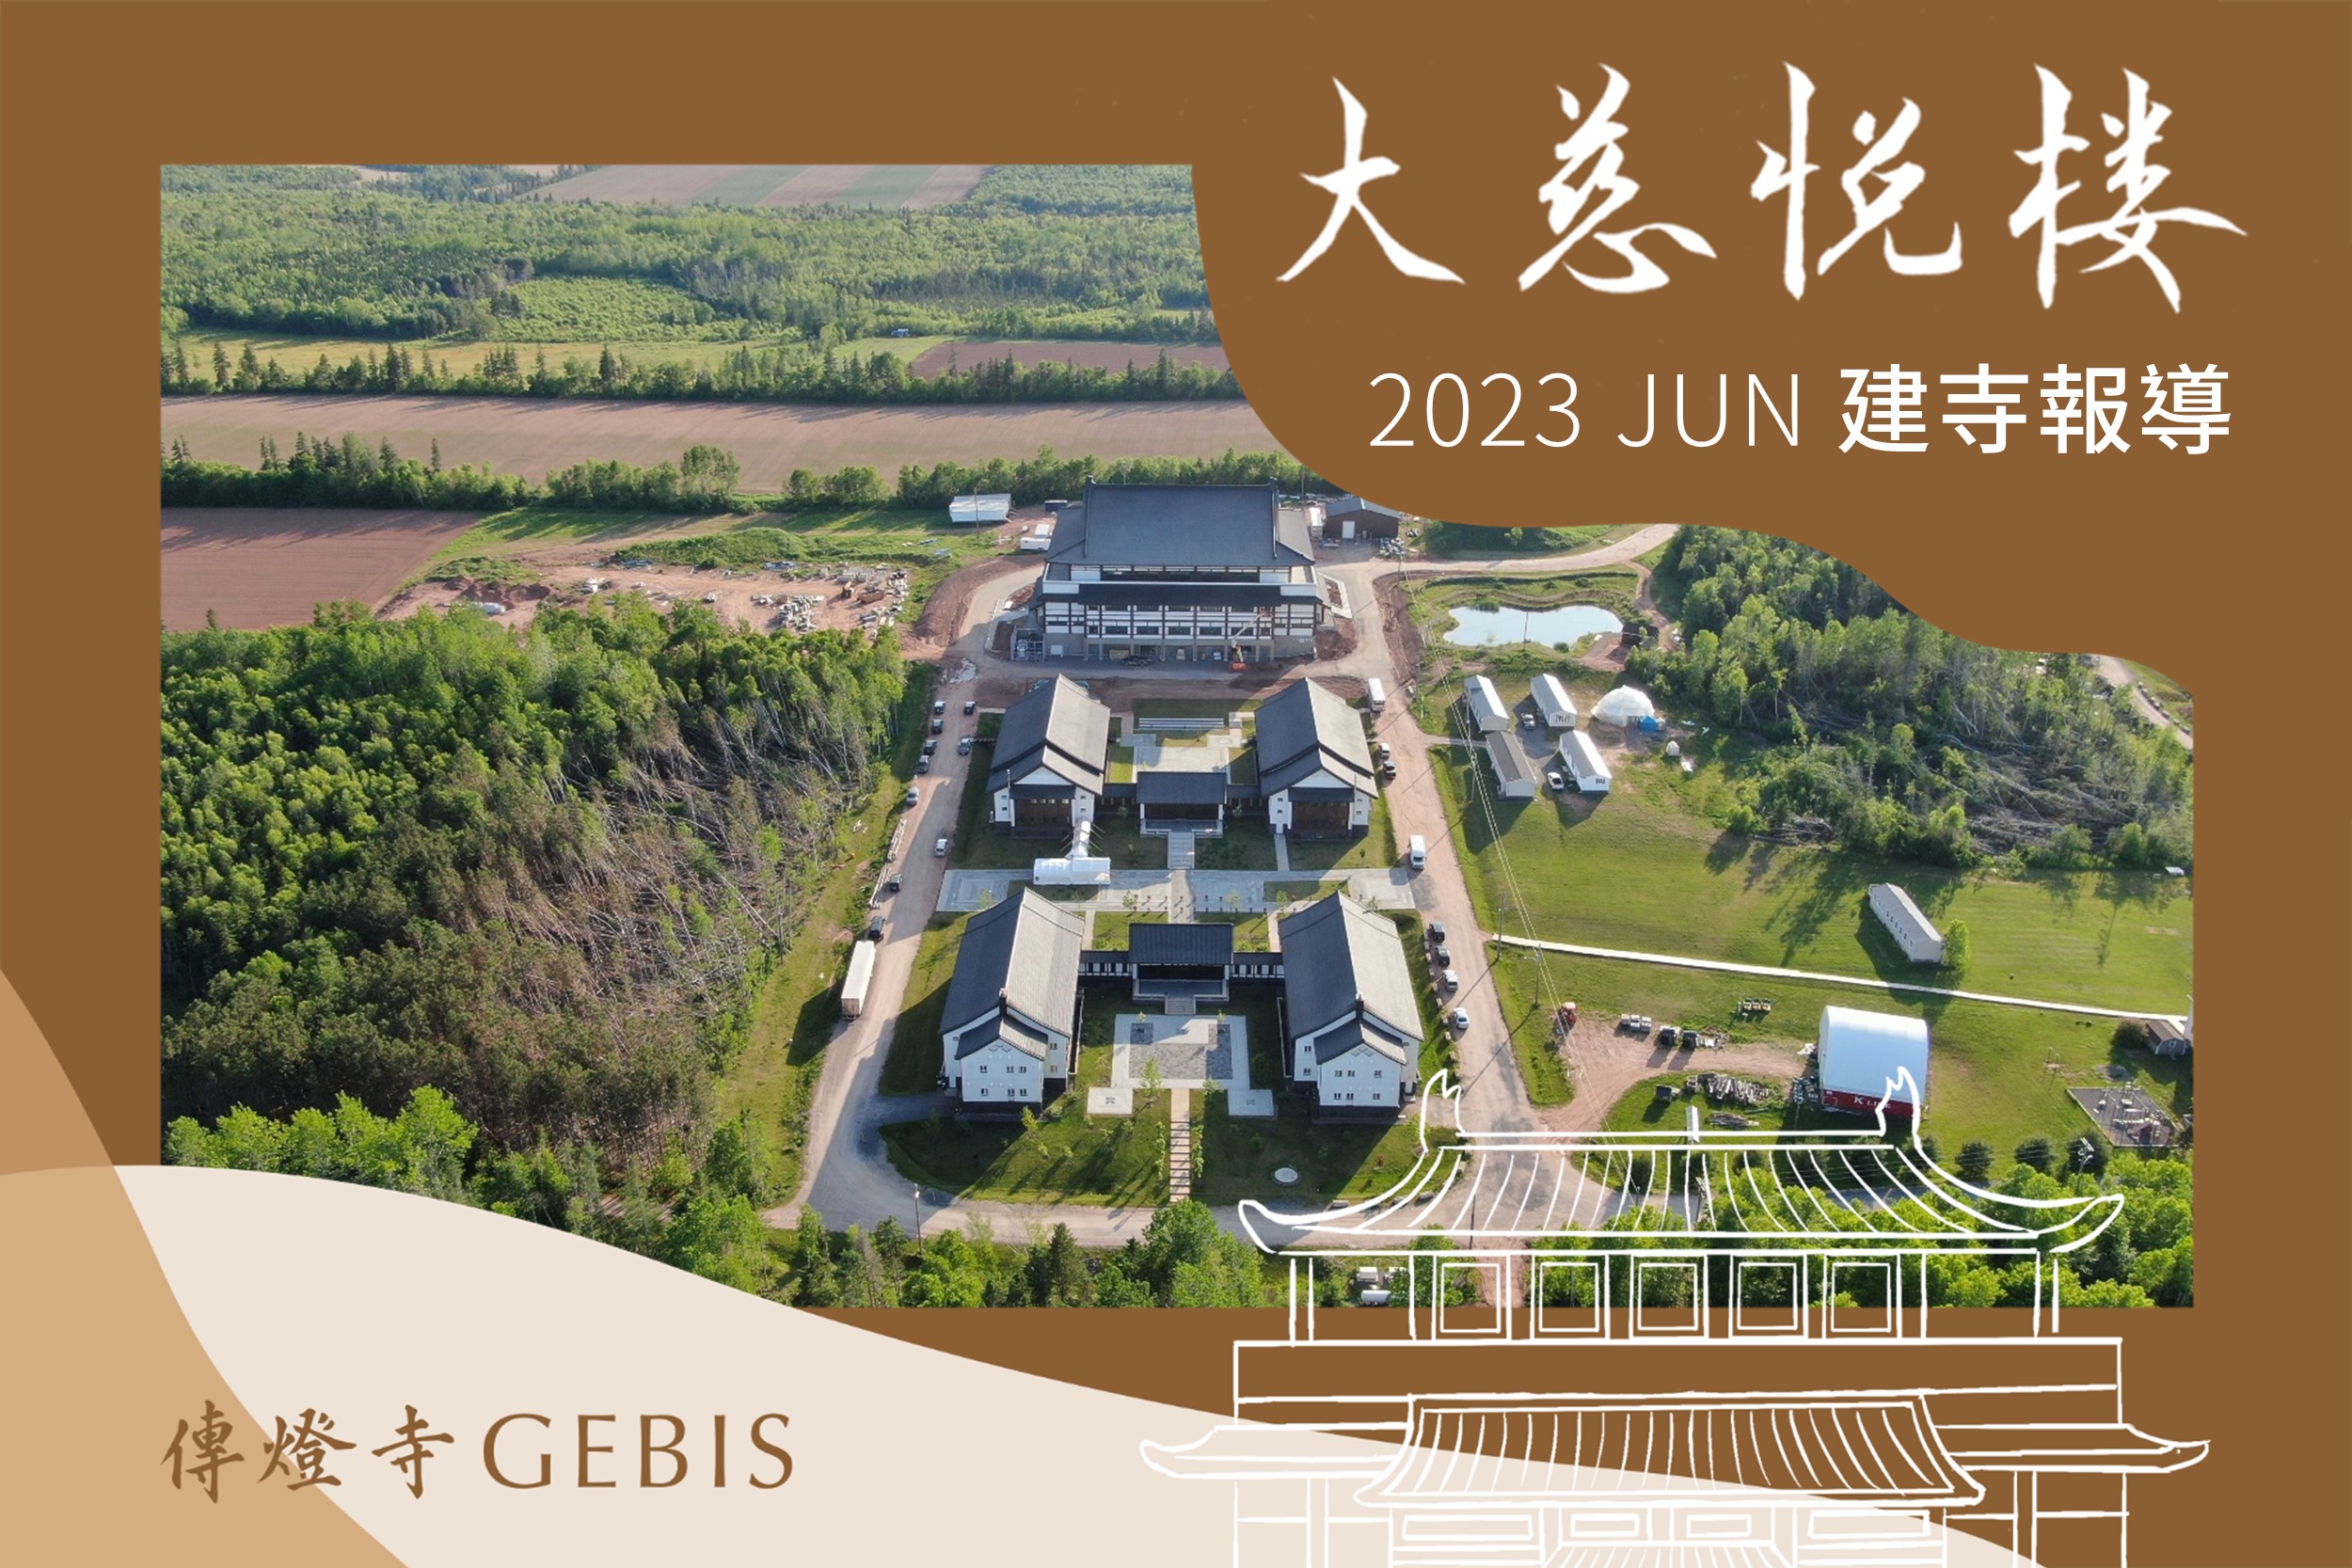 You are currently viewing 傳燈寺大慈悅樓：2023年6月建寺報導